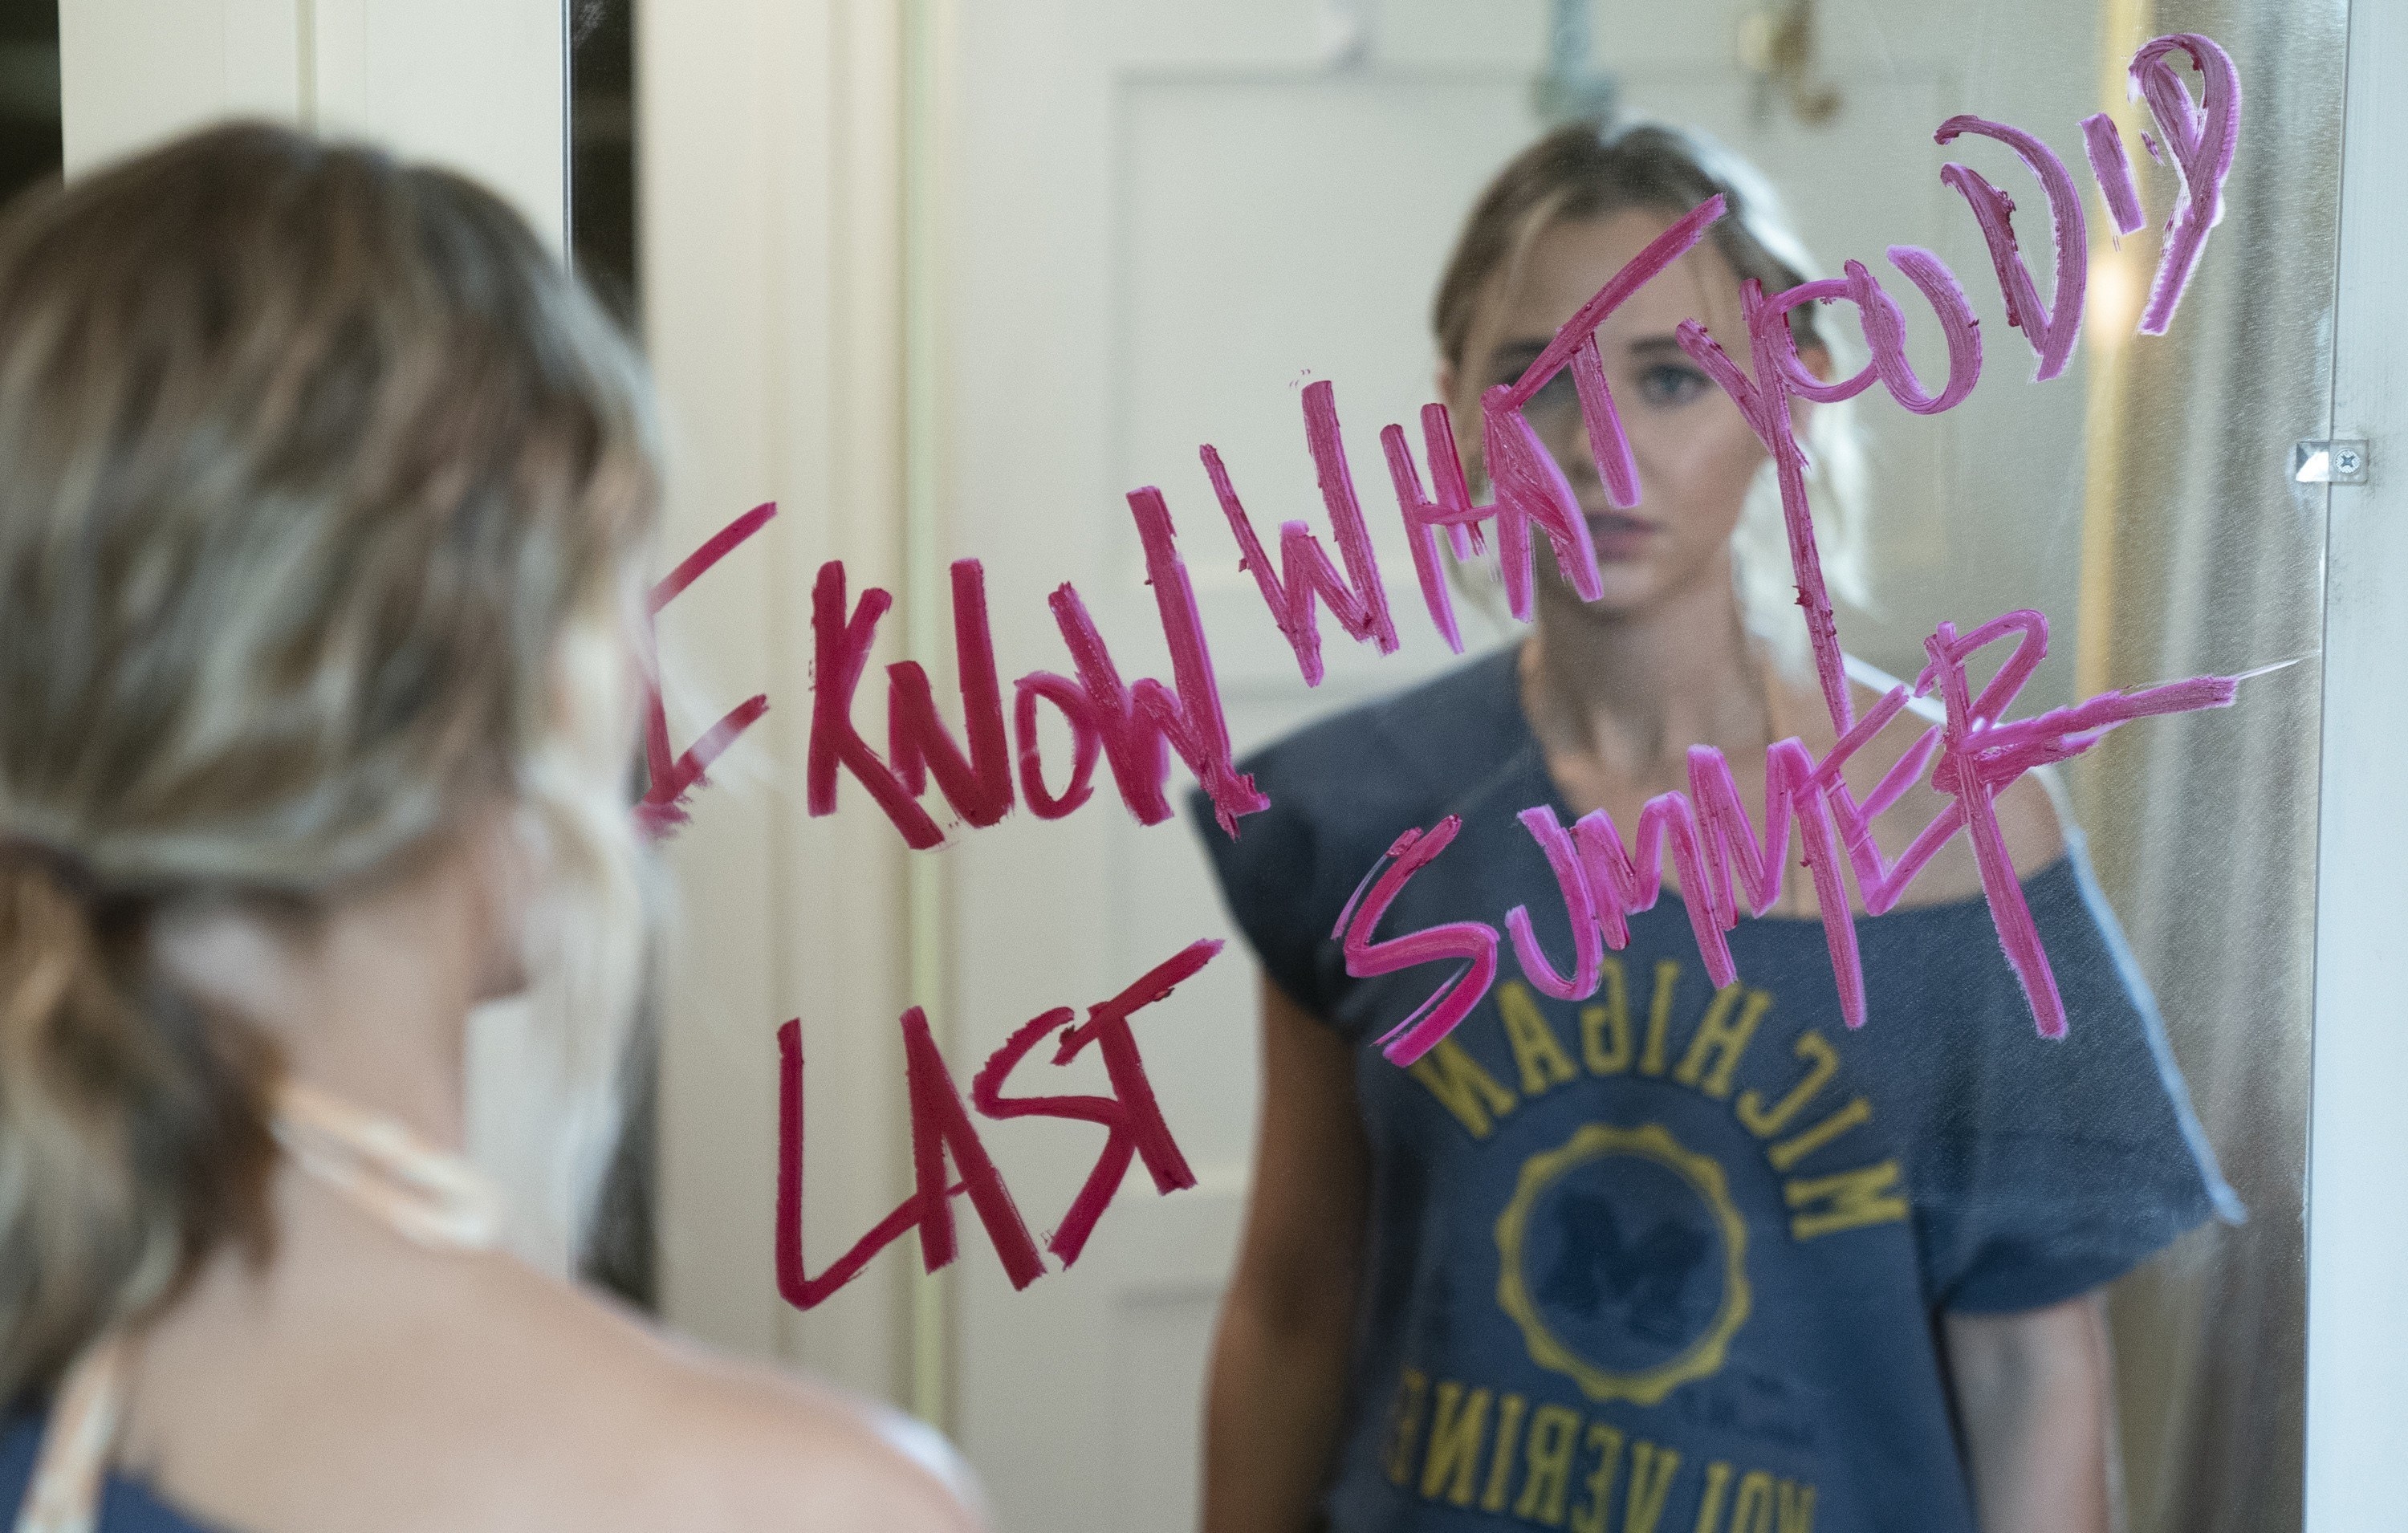 Madison Iseman looks into the mirror with &quot;I Know What You Did Last Summer&quot; written in lipstick